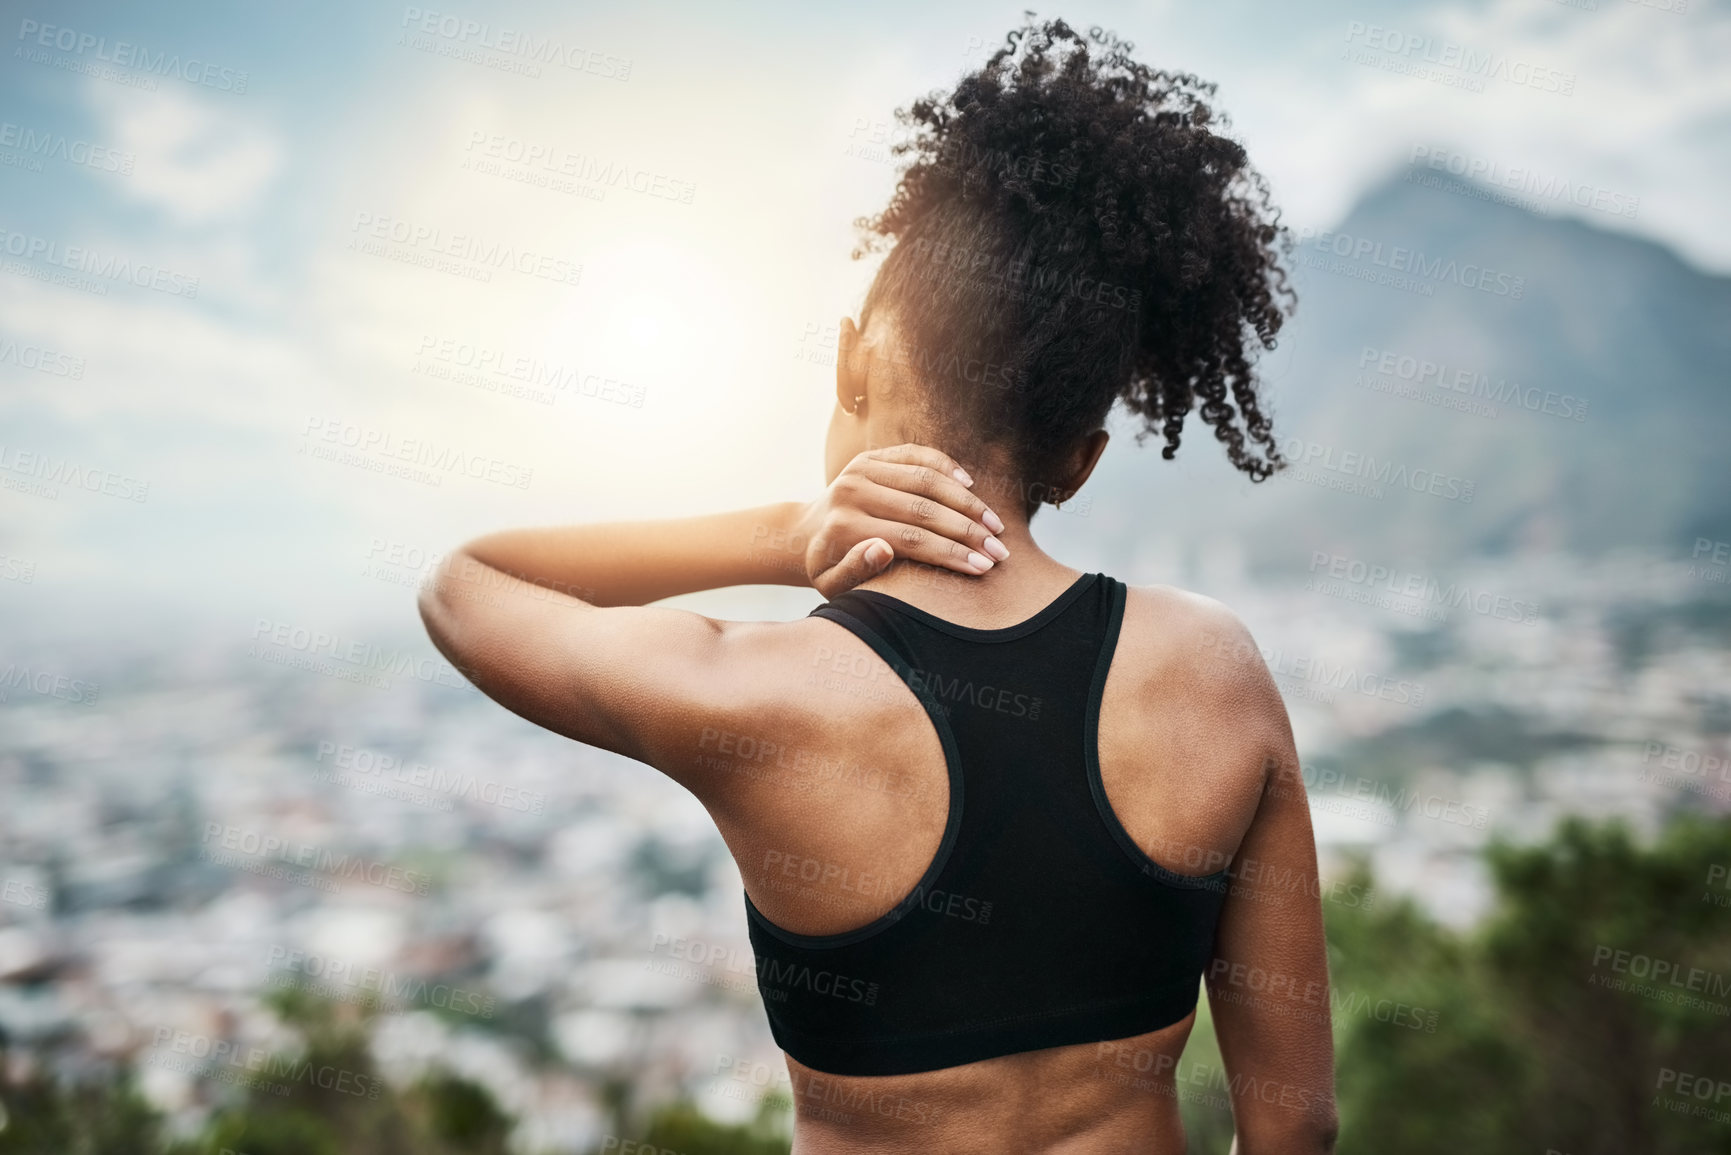 Buy stock photo Rearview shot of a sporty young woman holding her neck while exercising outdoors